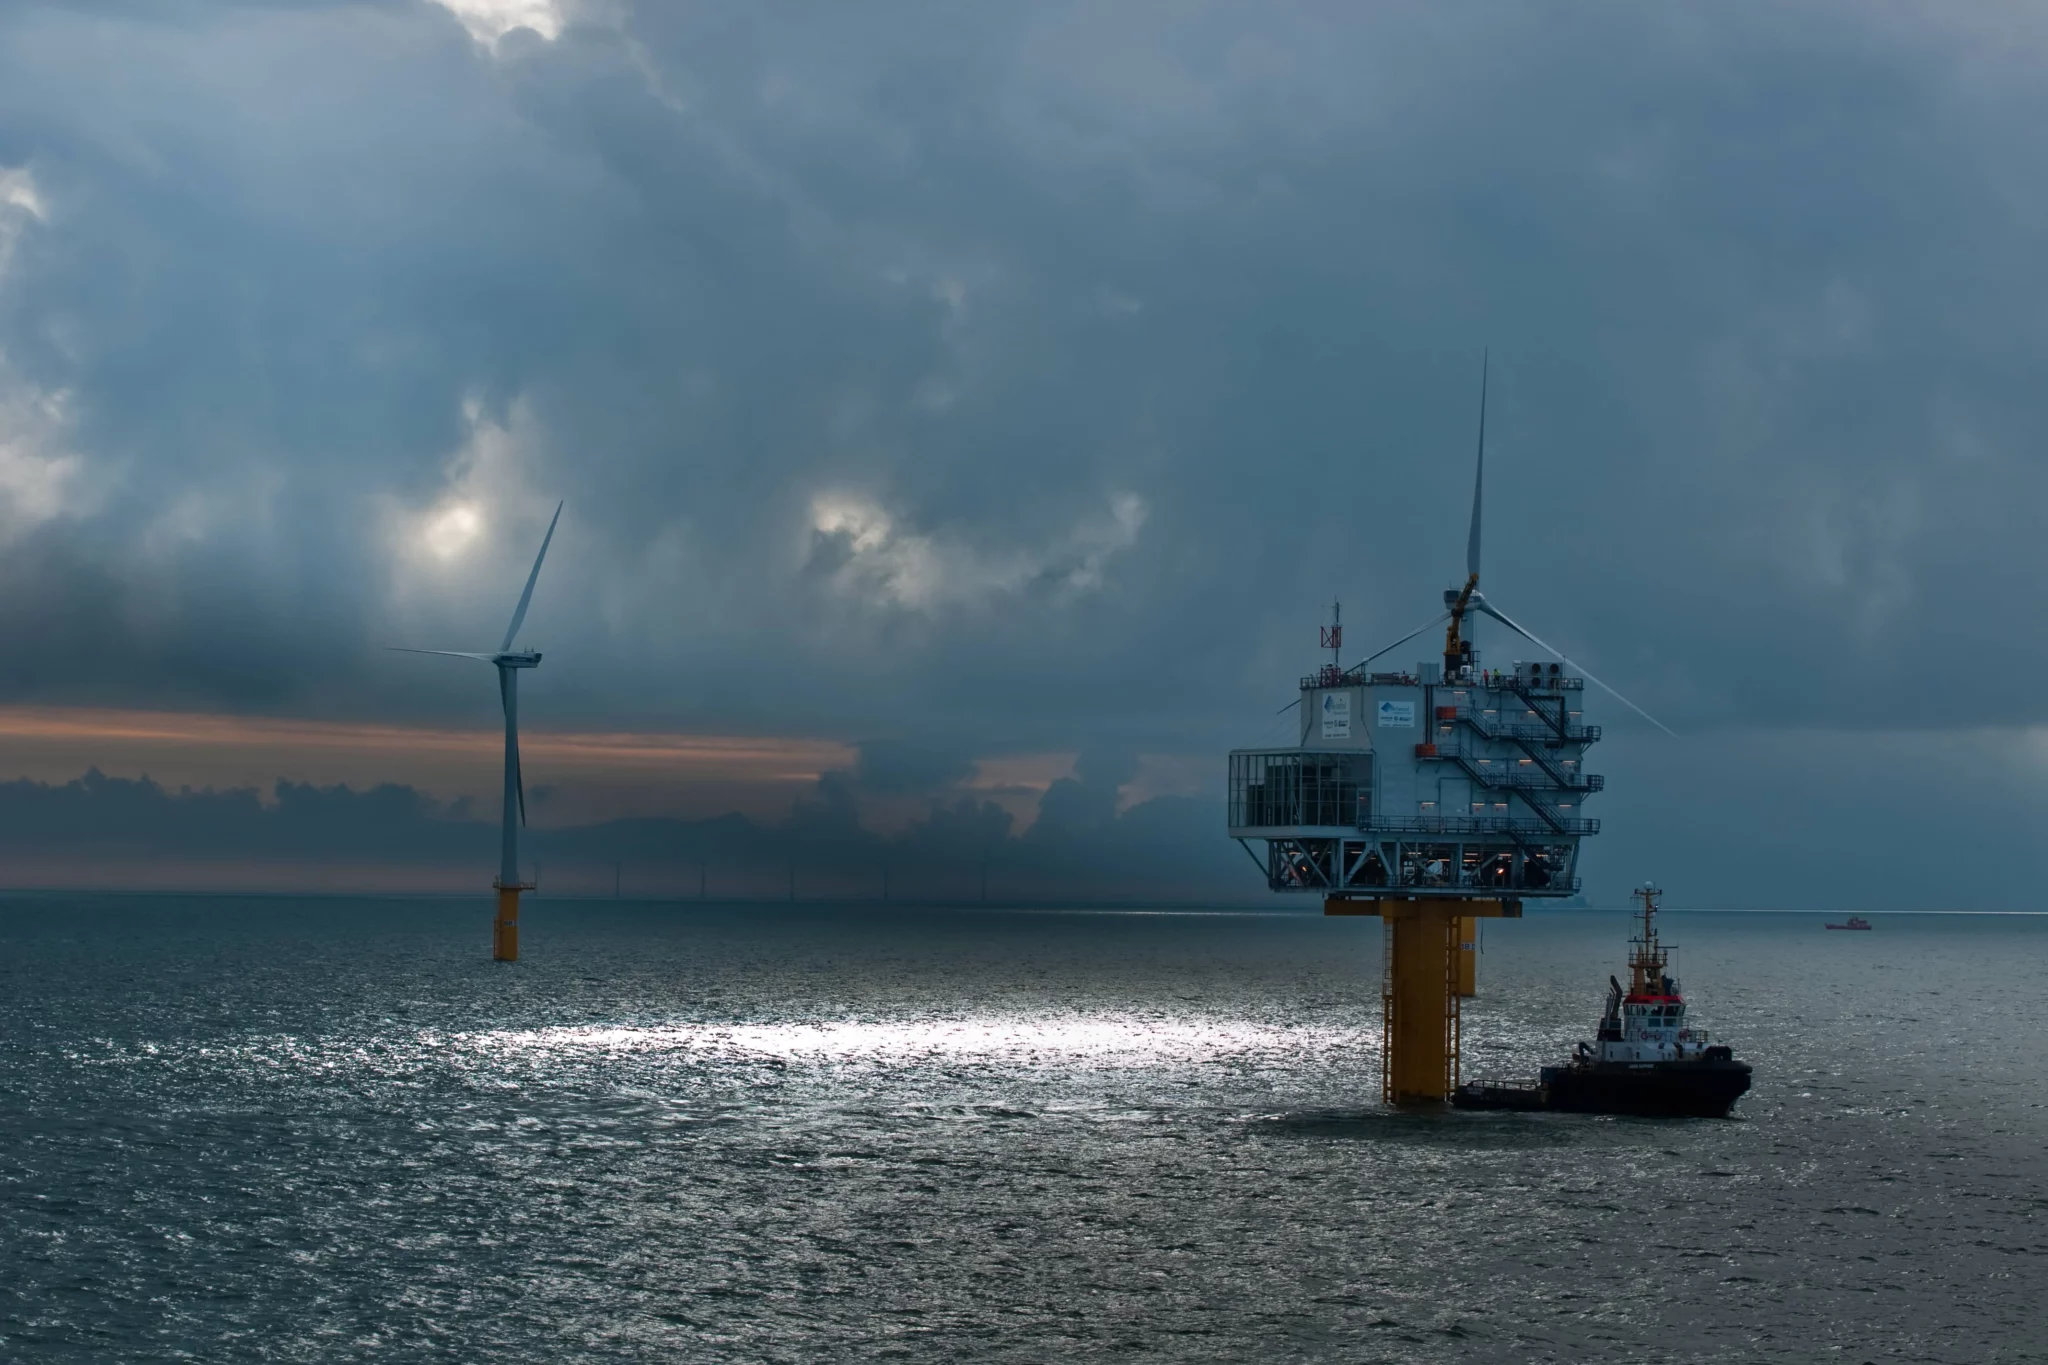 offshore wind farm with substation and vessel in the dark